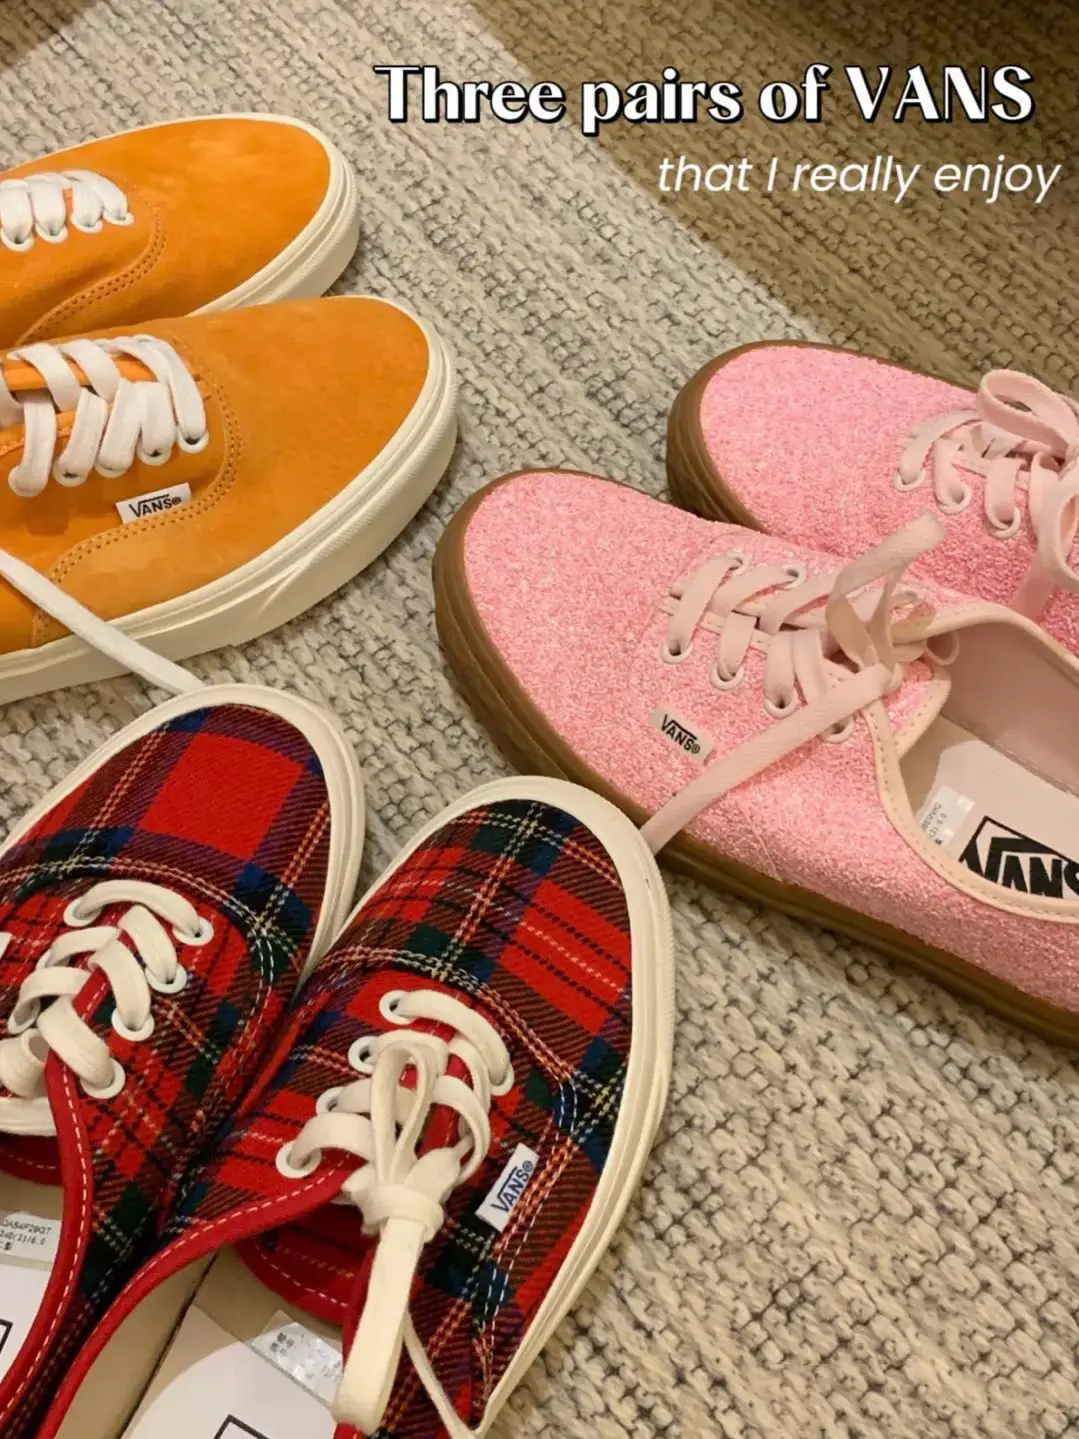 3 pairs of Oliviawardrobe Gallery | enjoy🫶🏻 that posted vans I Lemon8 | really by